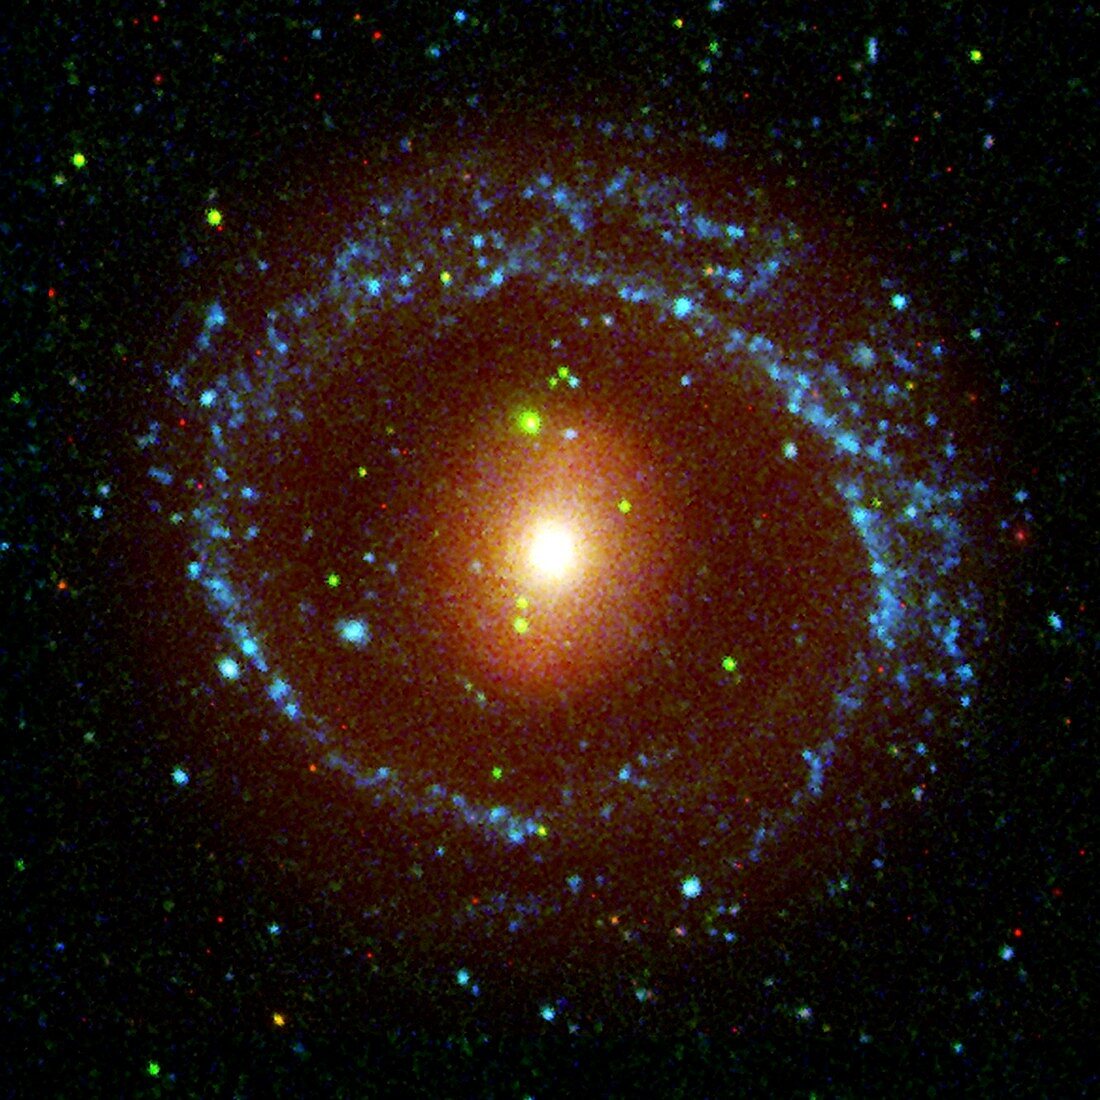 Ring galaxy NGC 1291,composite image